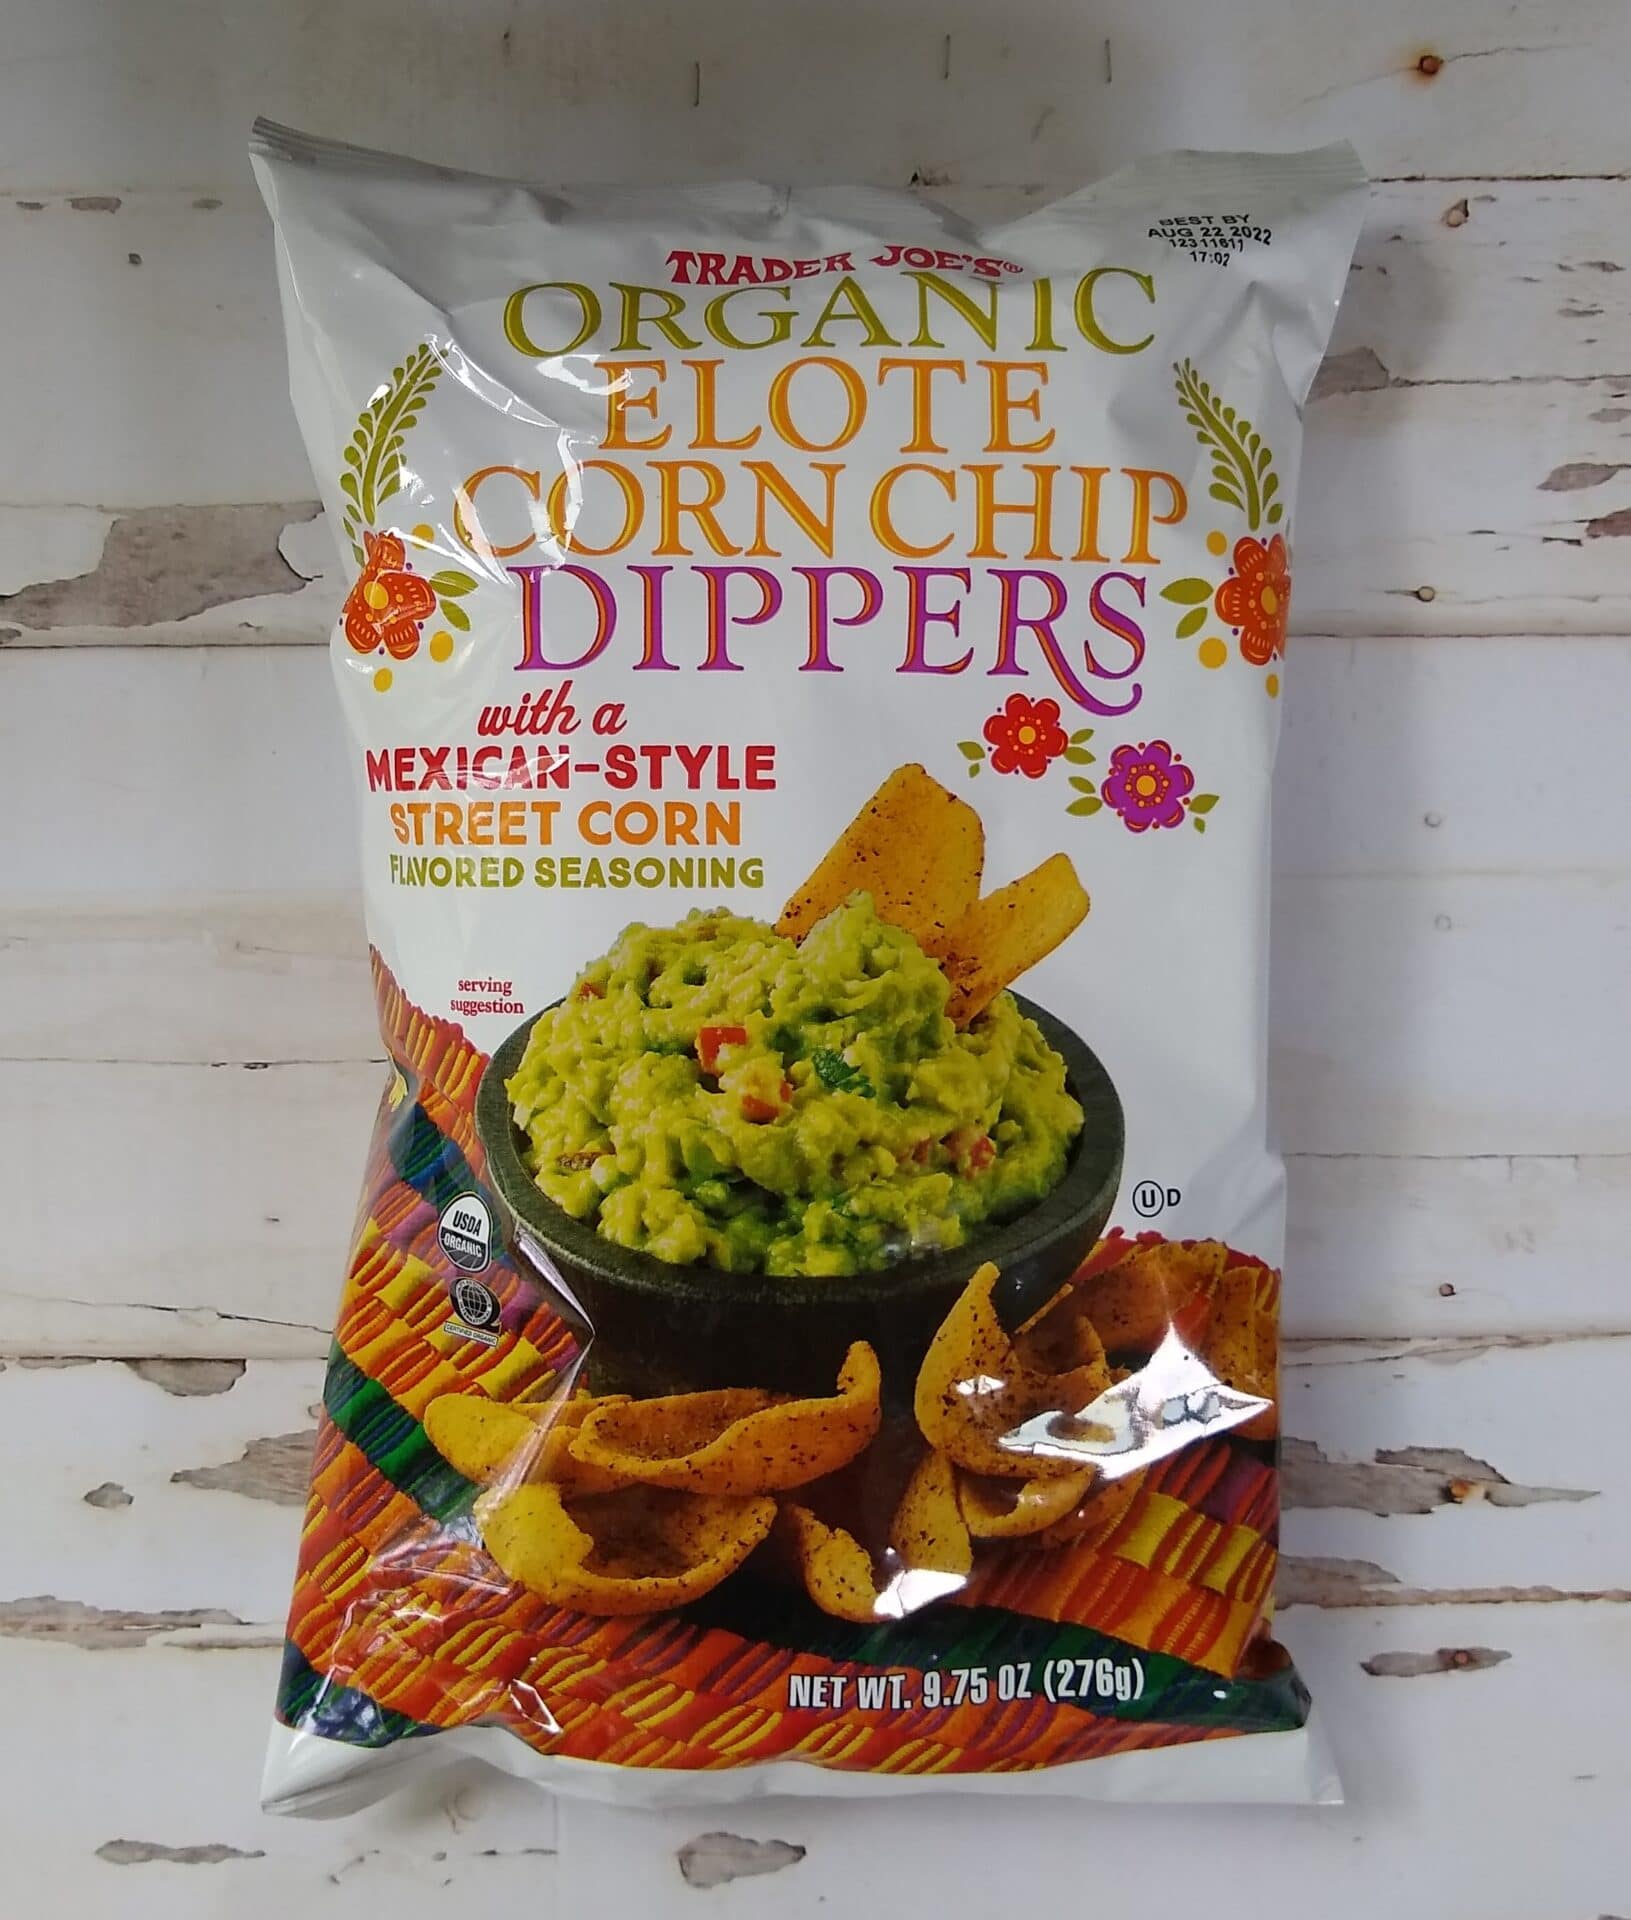 Trader Joe's Organic Elote Corn Chip Dippers with a Mexican-Style Street Corn Flavored Seasoning